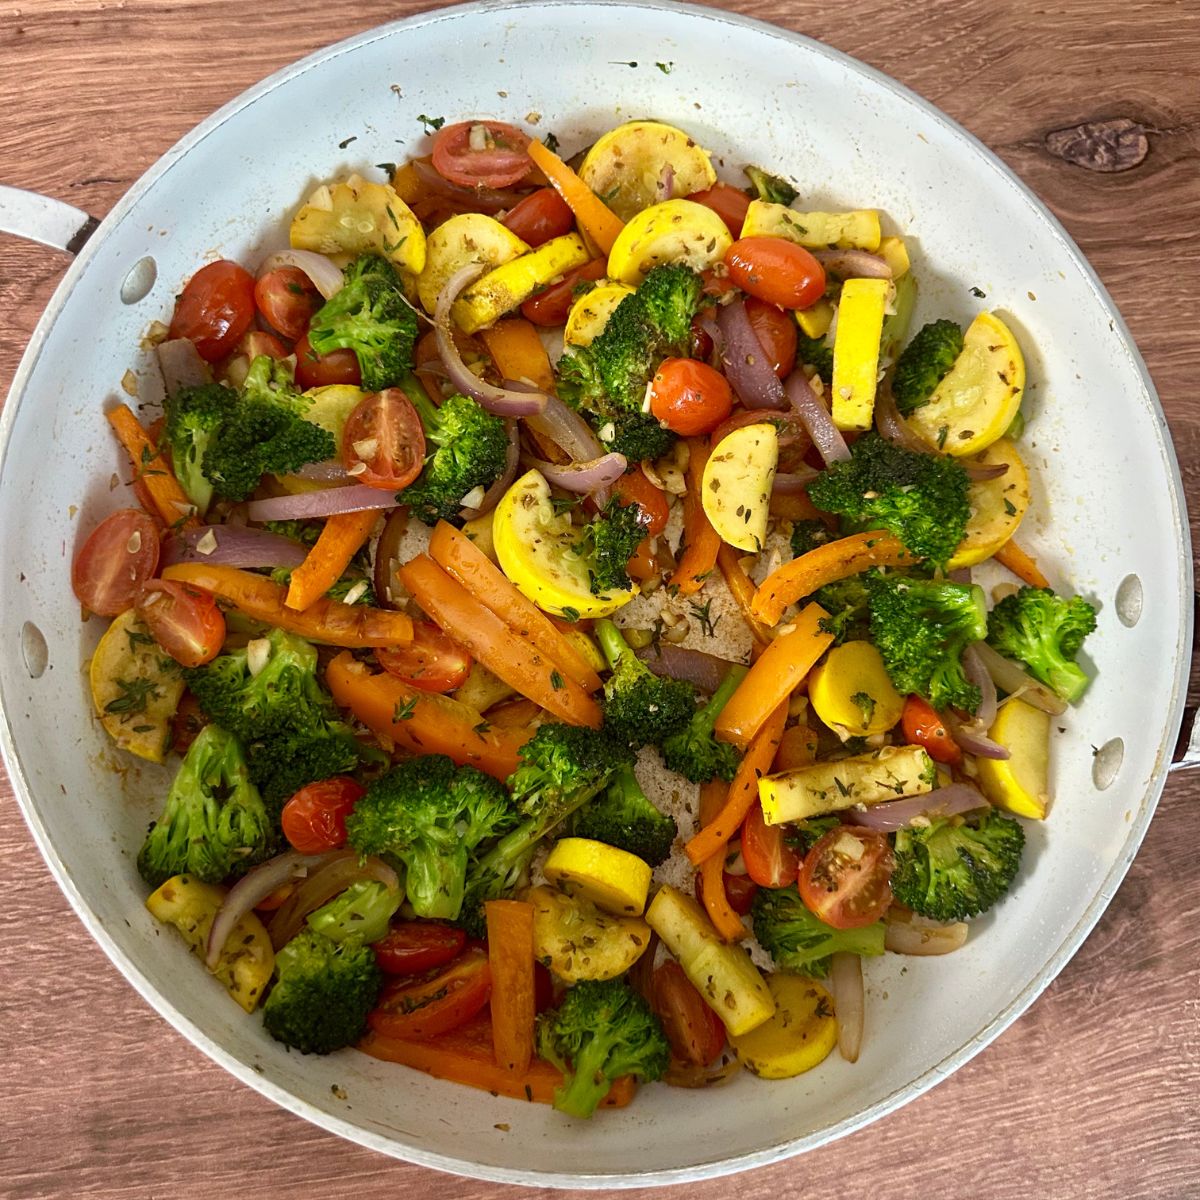 sauteed broccoli, yellow squash, orange bell pepper, red onion, grape tomatoes and spices in a large skillet.